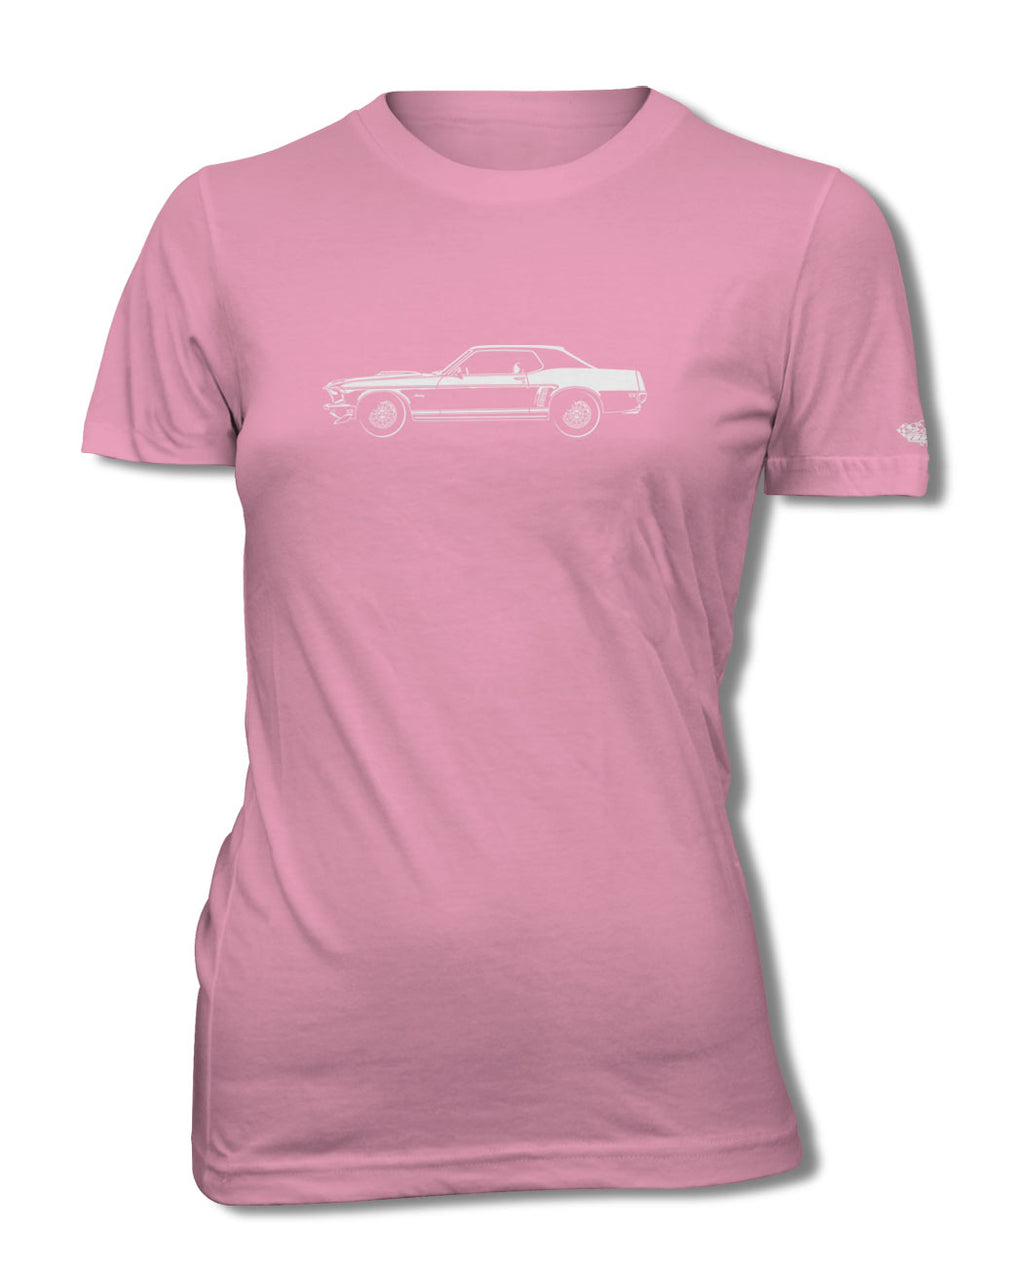 1969 Ford Mustang GT Coupe T-Shirt - Women - Side View